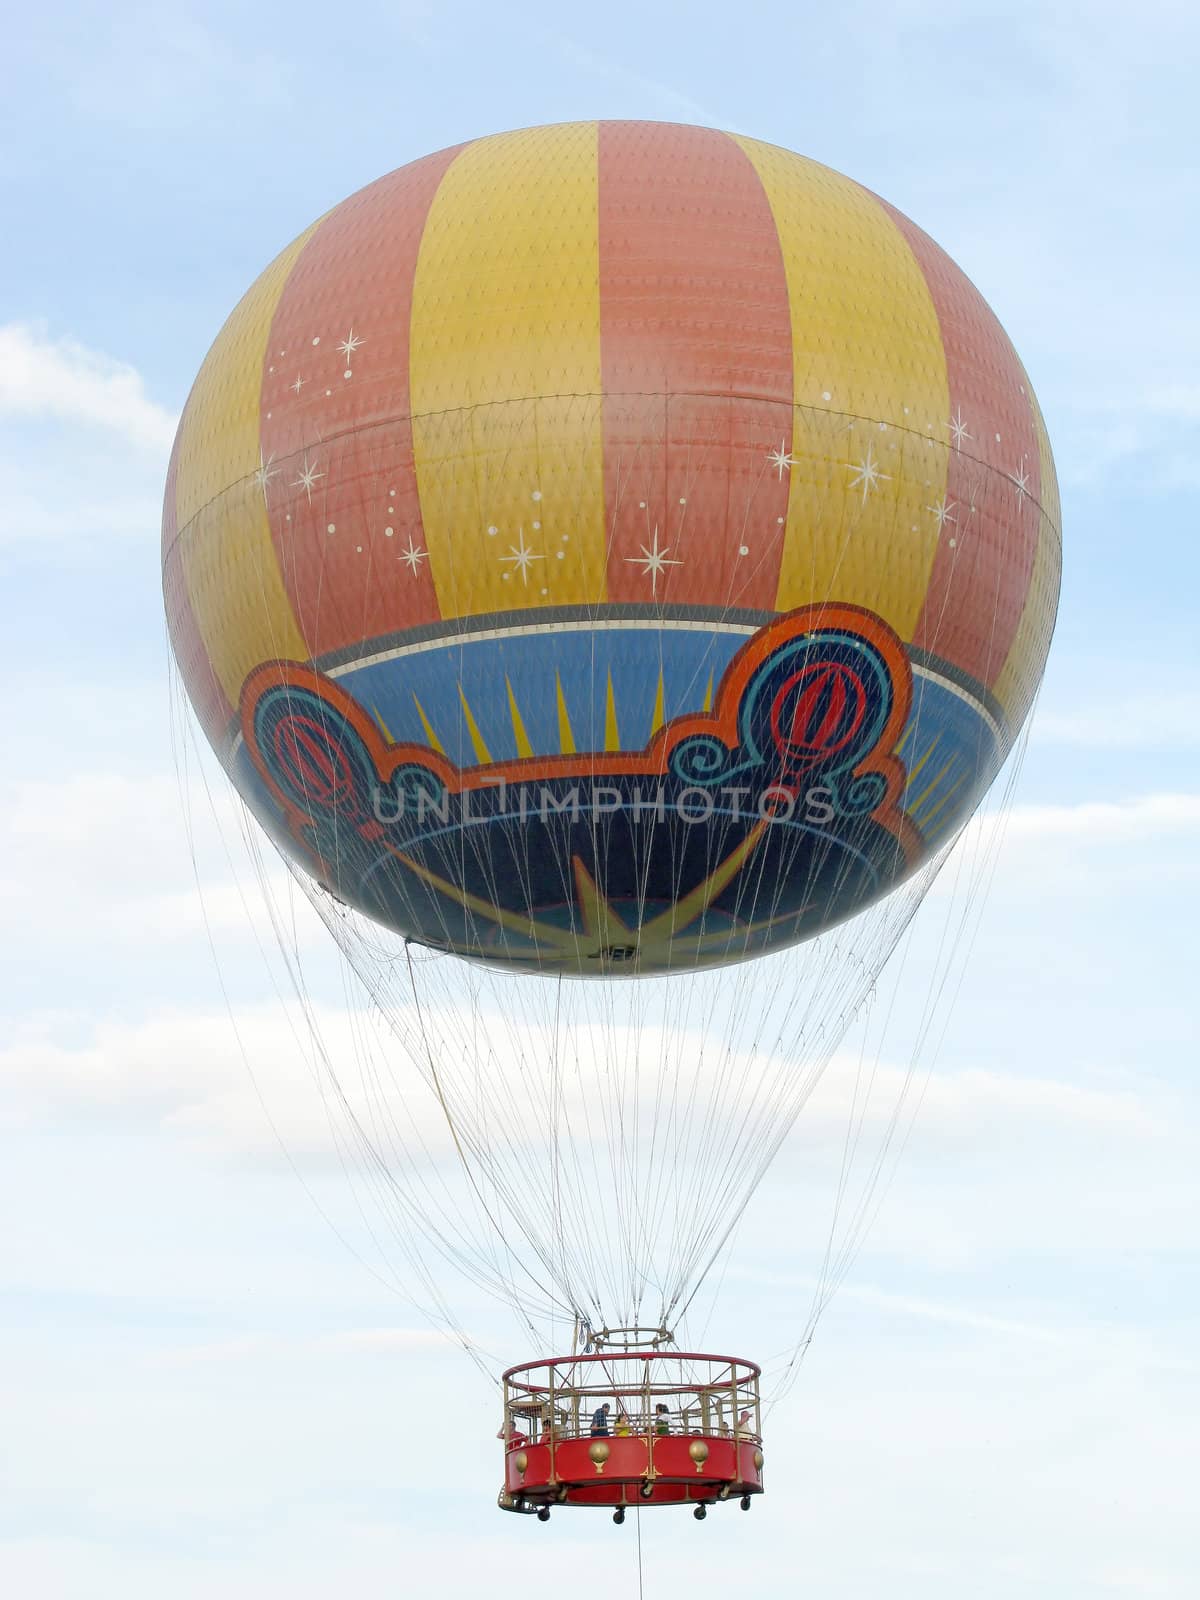 A Hot Air Balloon ride up in the sky